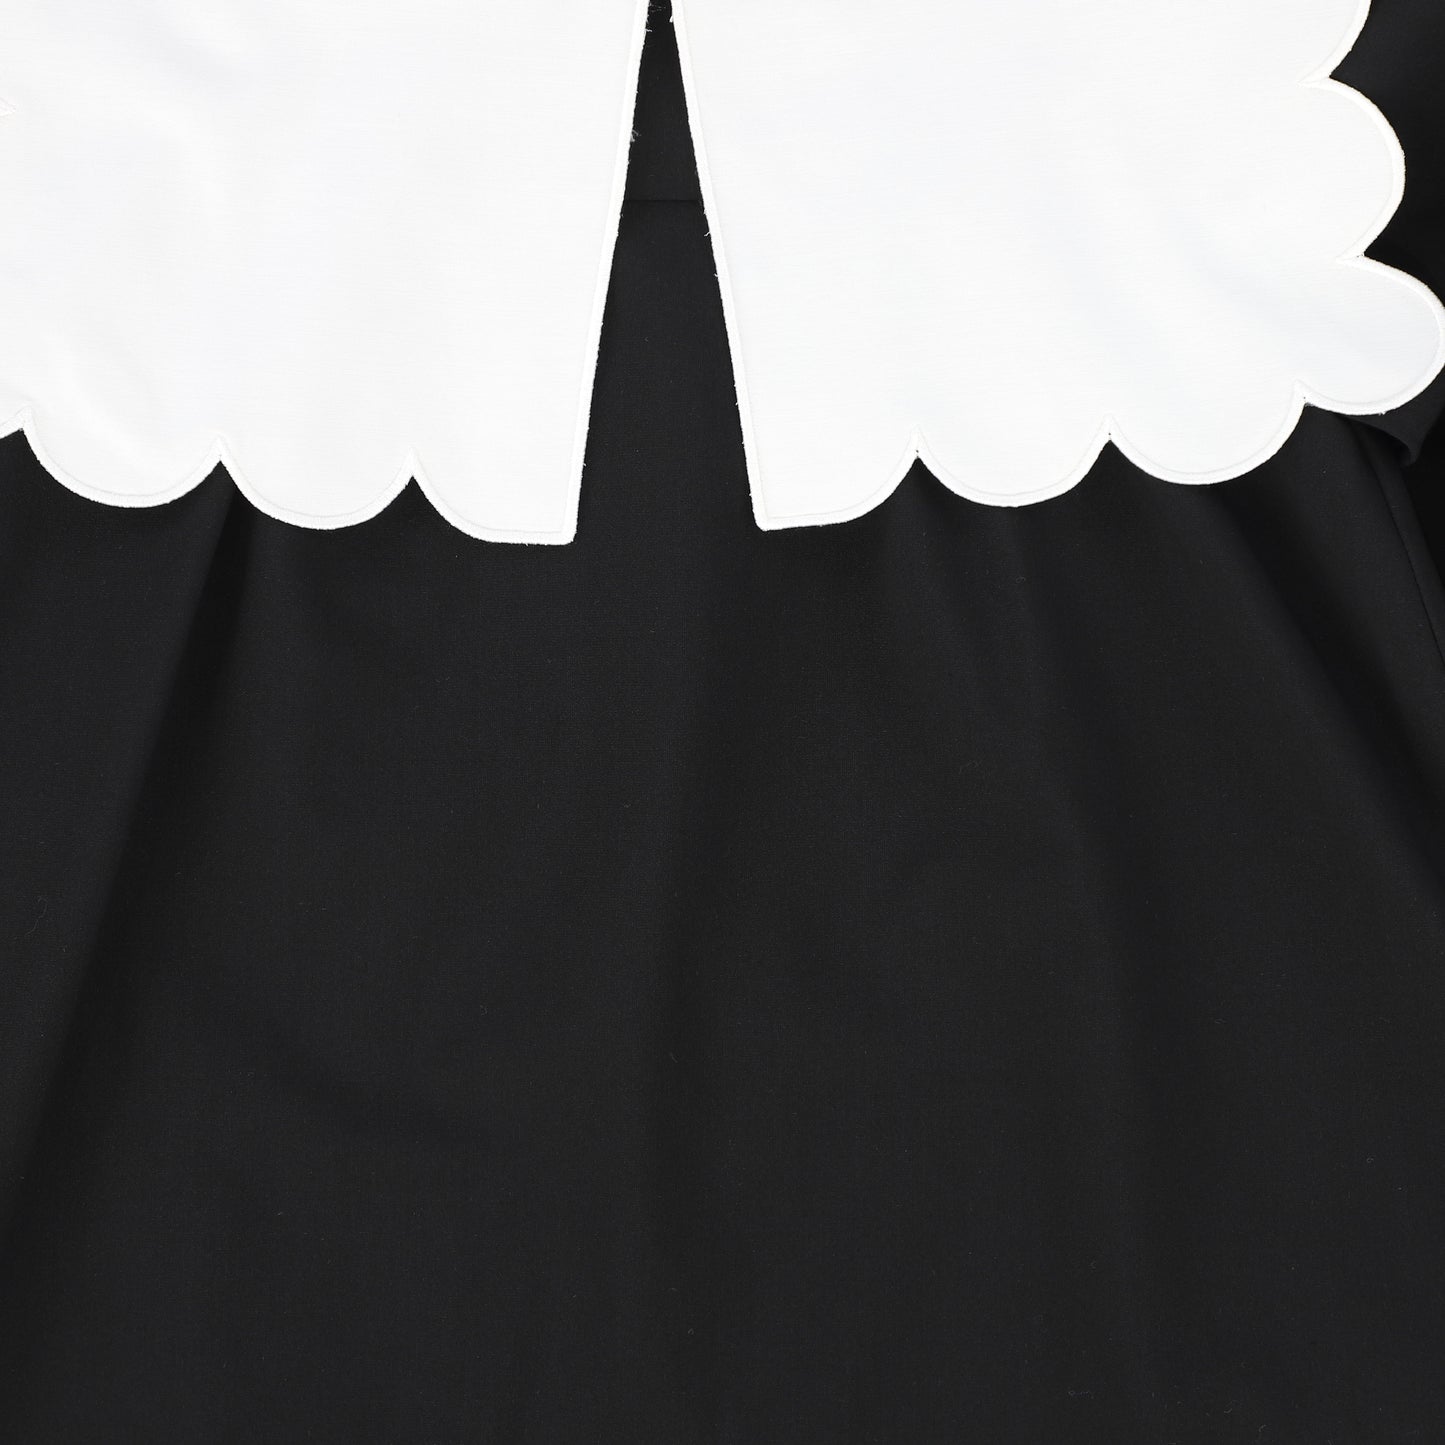 AISABOBO BLACK WITH IVORY SCALLOP DRESS [Final Sale]